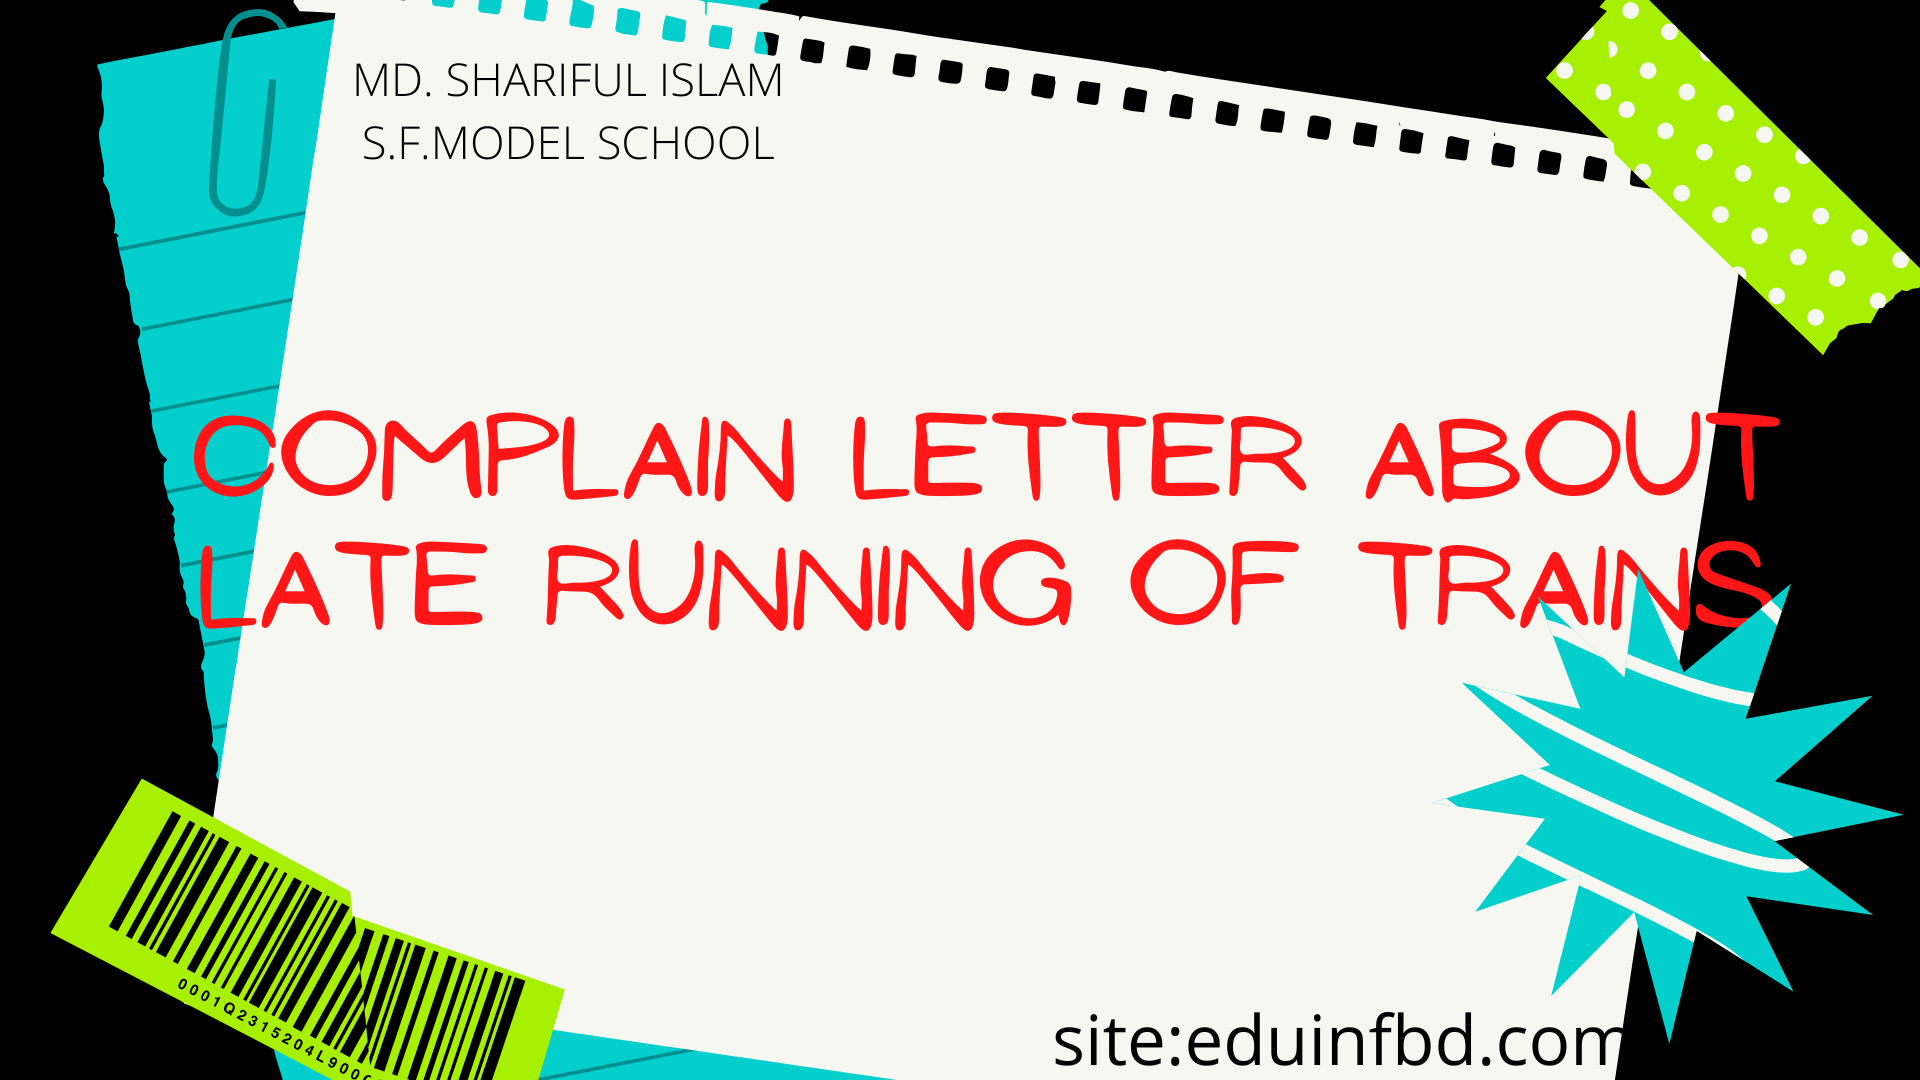 Complain letter about late running of trains